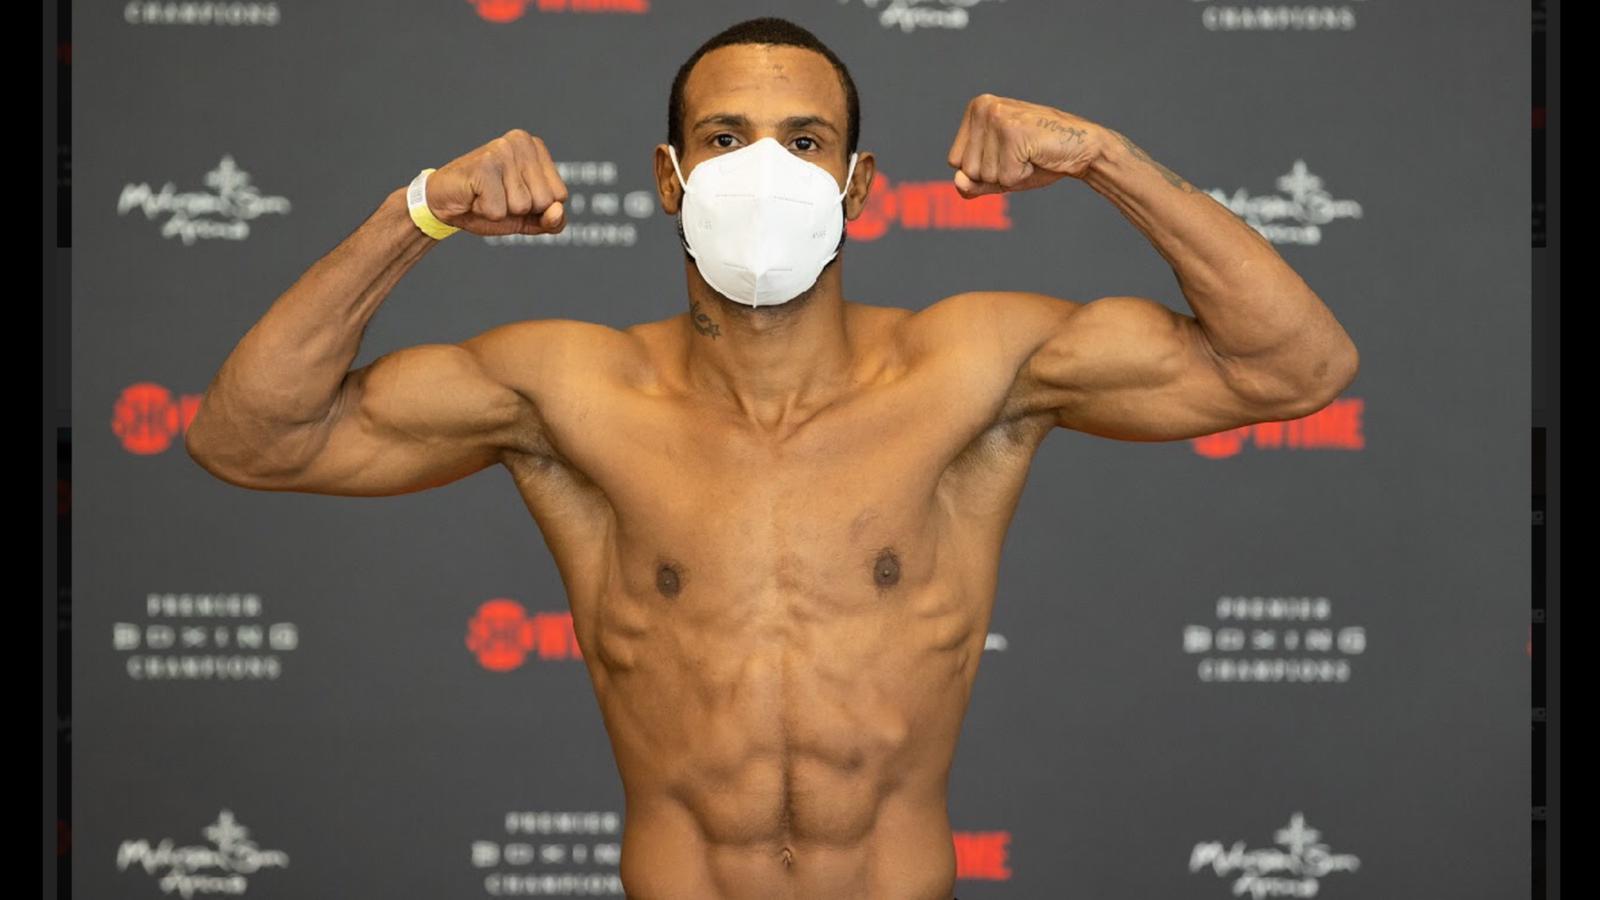 Martinez and Marrero made weight for their WBA eliminator in Connecticut